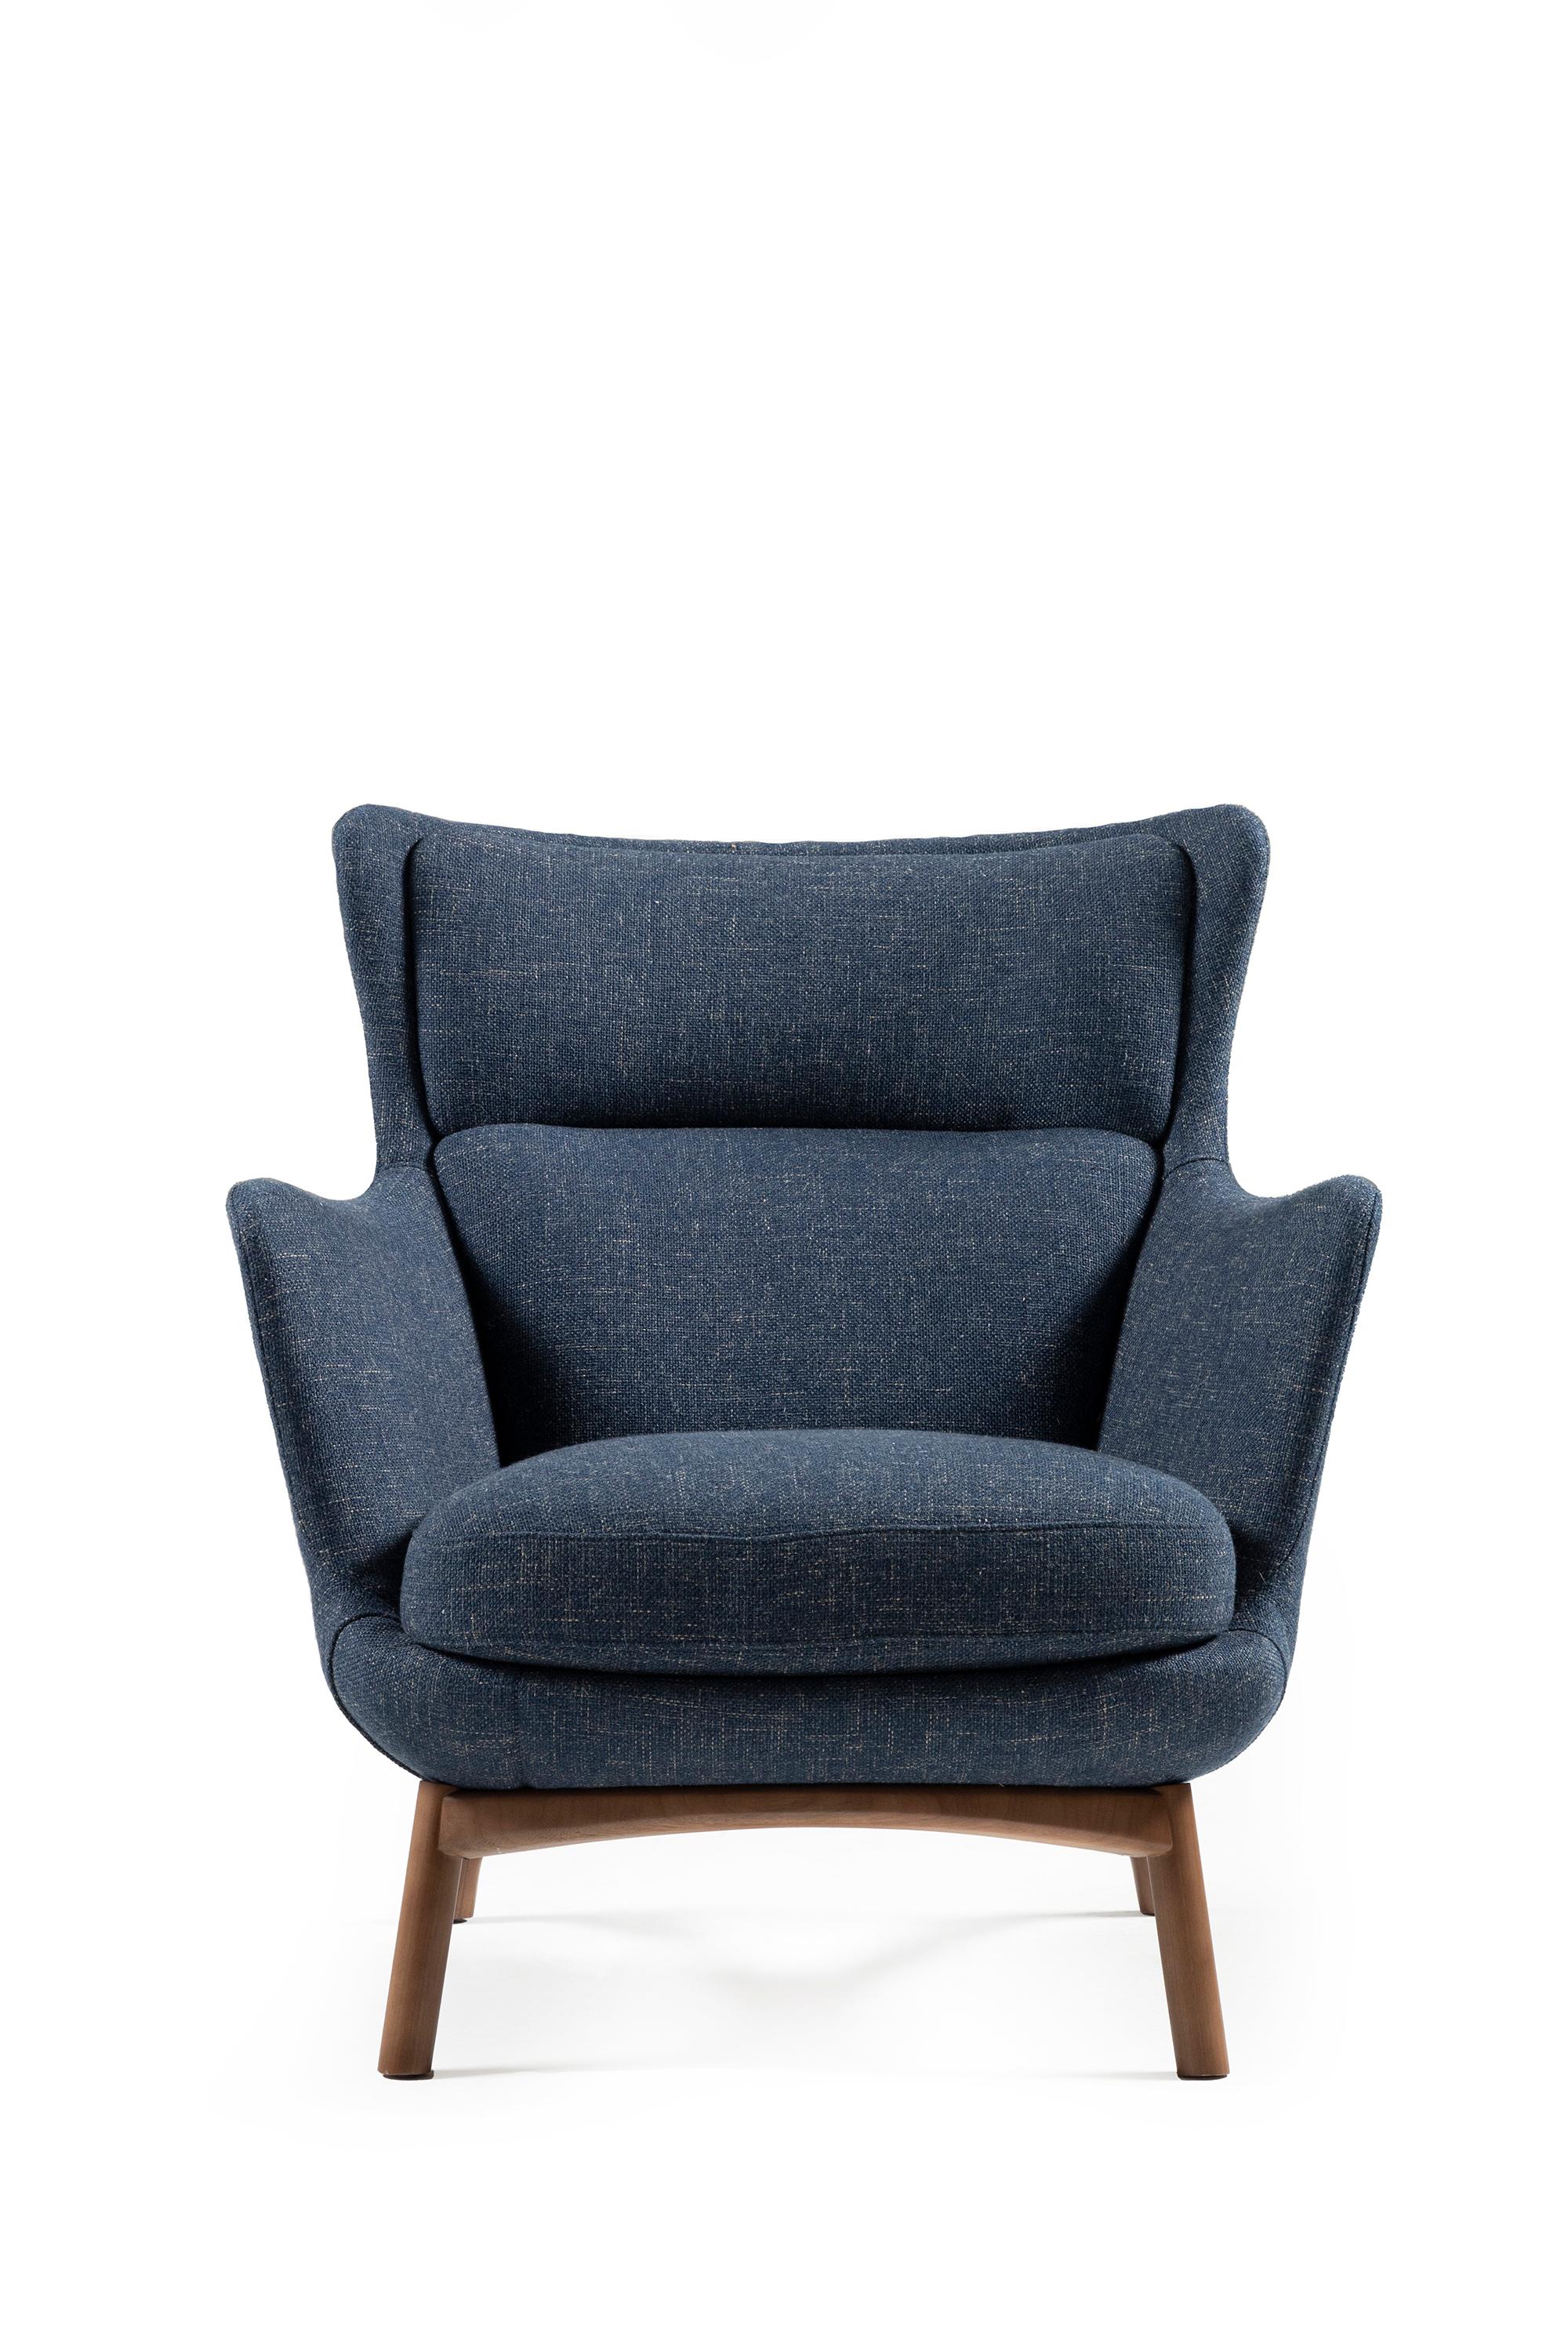 Sublime High Armchairs, Contemporary Style in Solid Wood, Textiles Upholstery For Sale 6